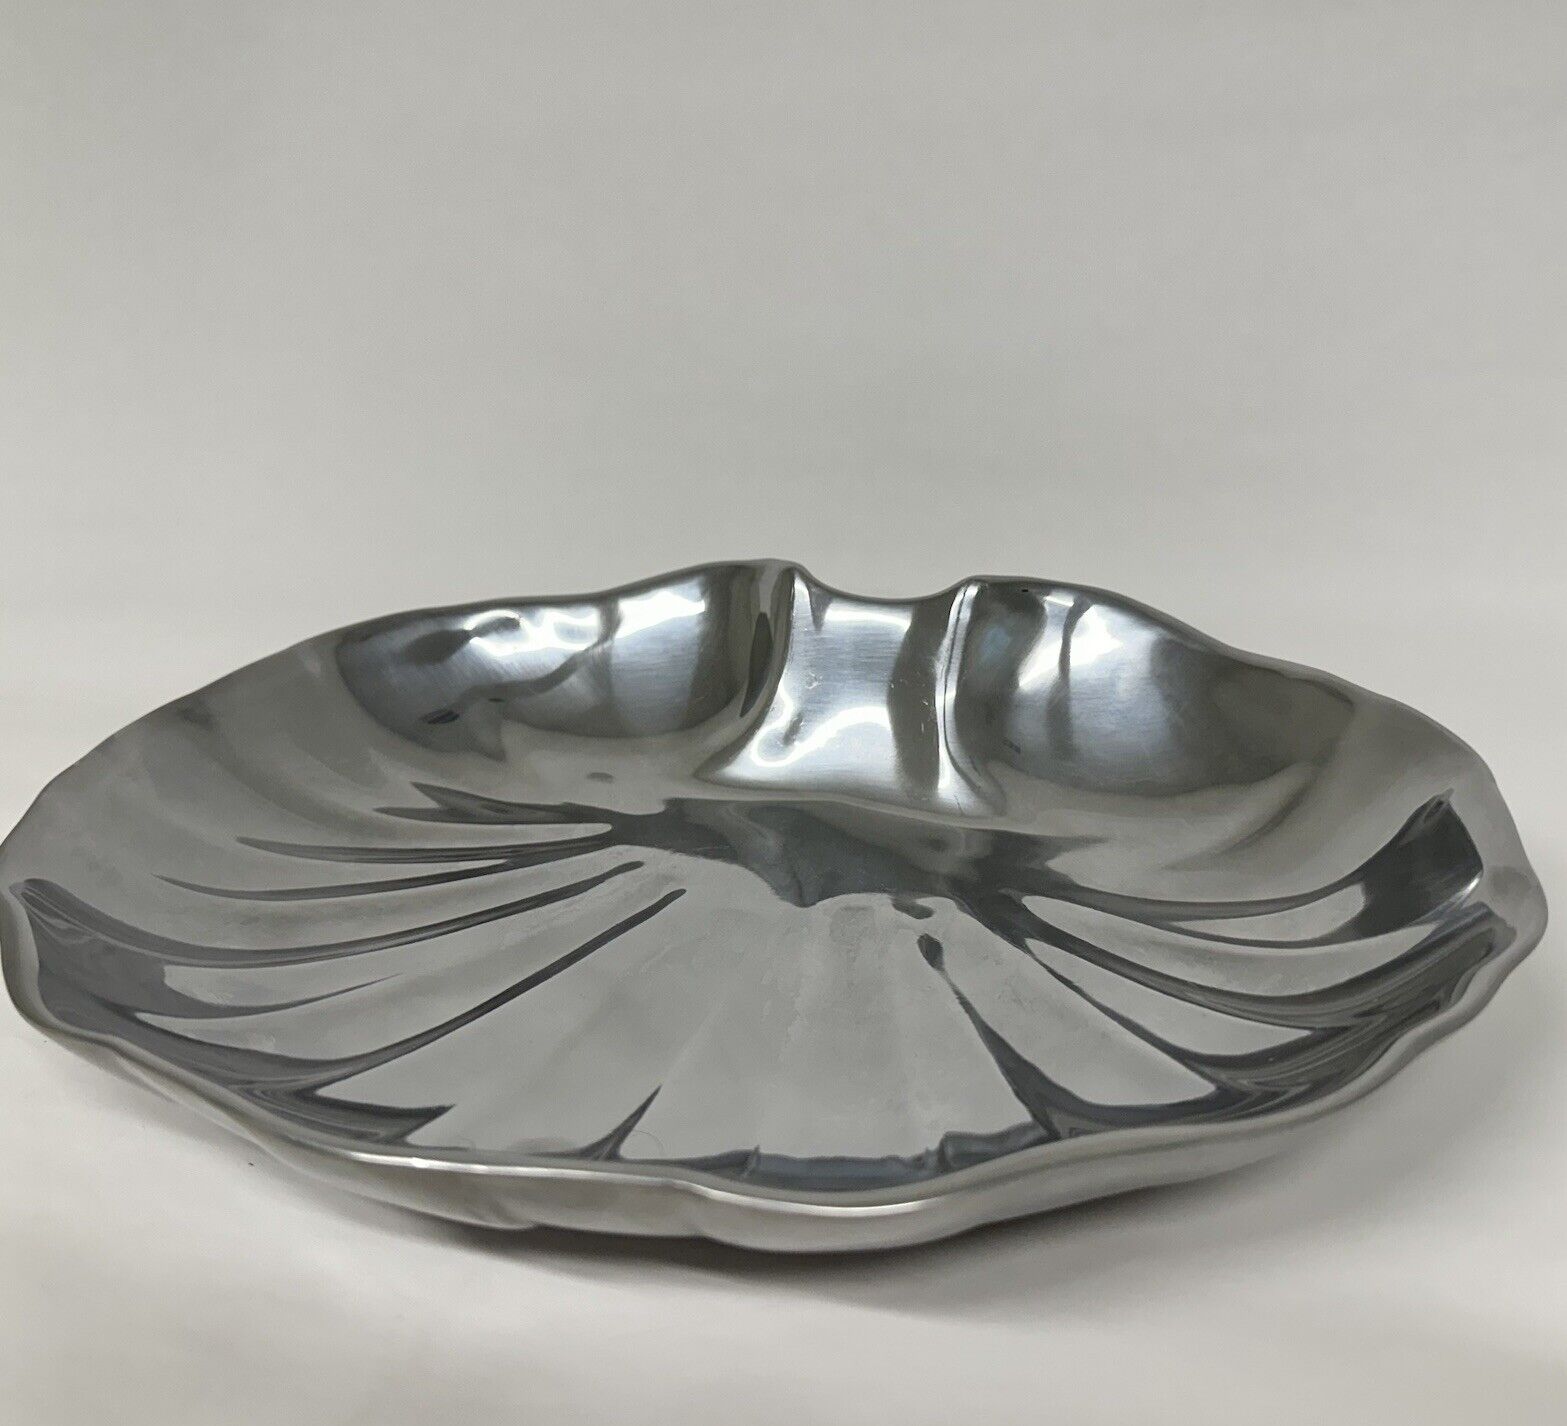 Wilton Armetale Pewter Clam Shell Shape Serving Platter Tray 11 x 9